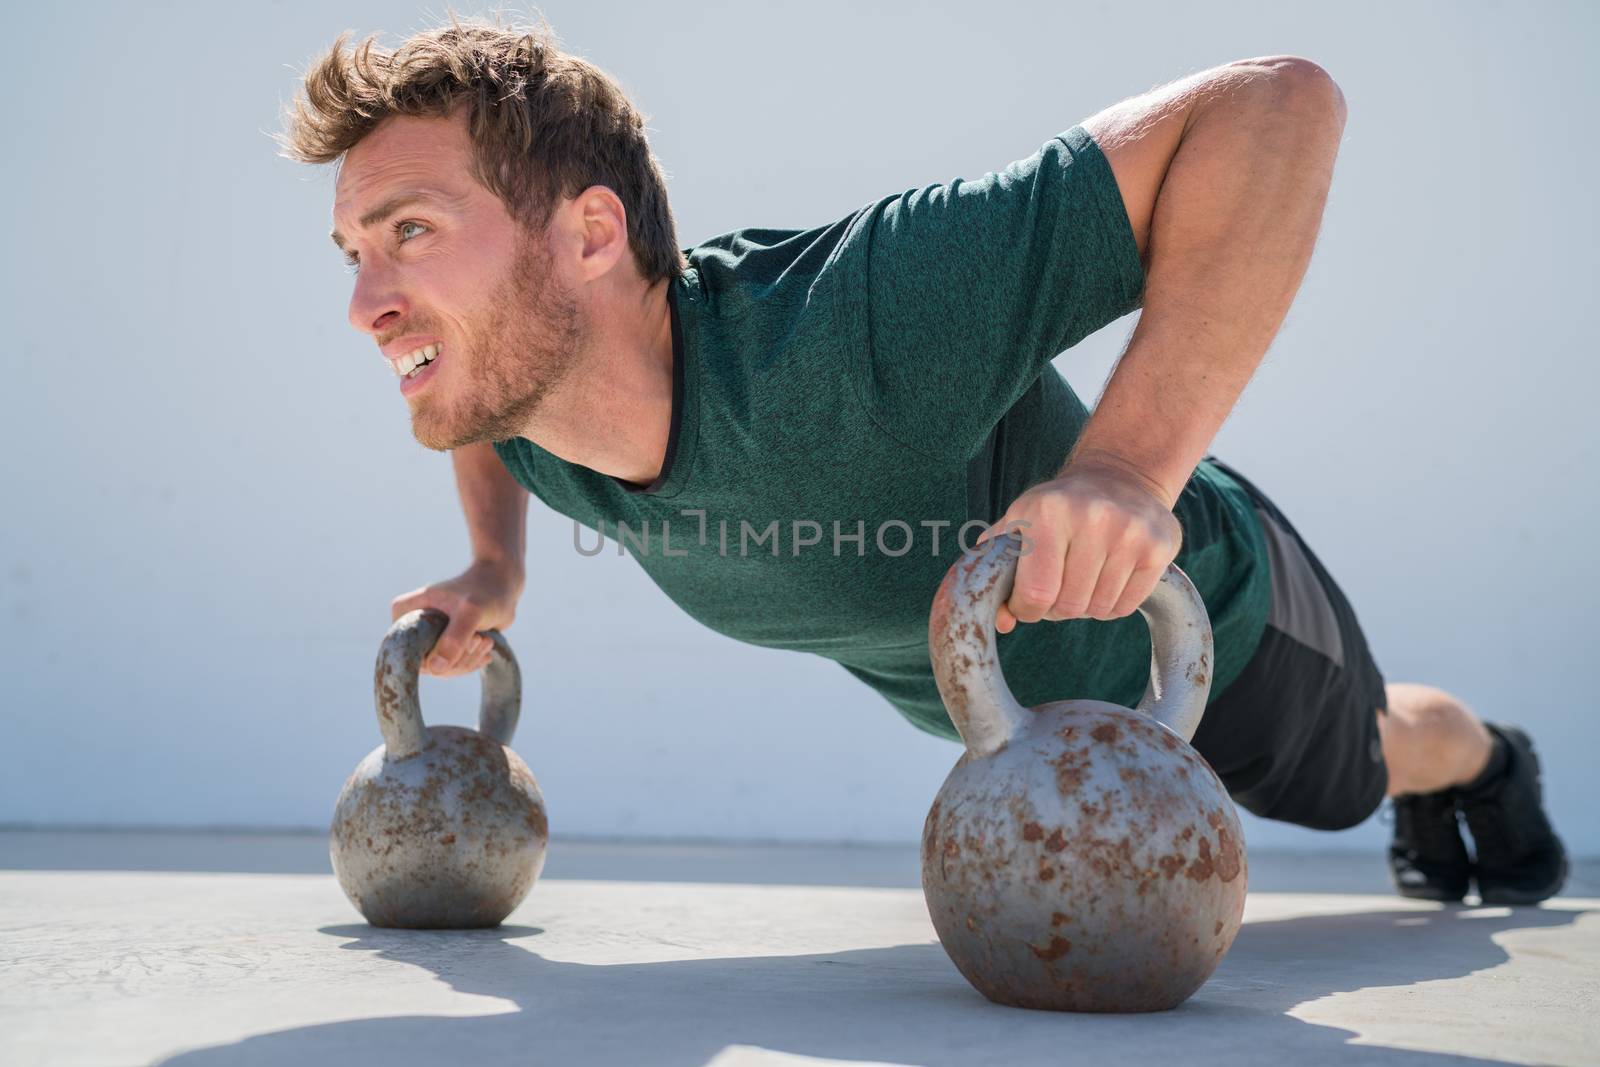 Fitness gym man doing pushups workout holding kettlebells for full extended push-ups floor exercises at outdoor gym. Athlete working out with bodyweight exercise.